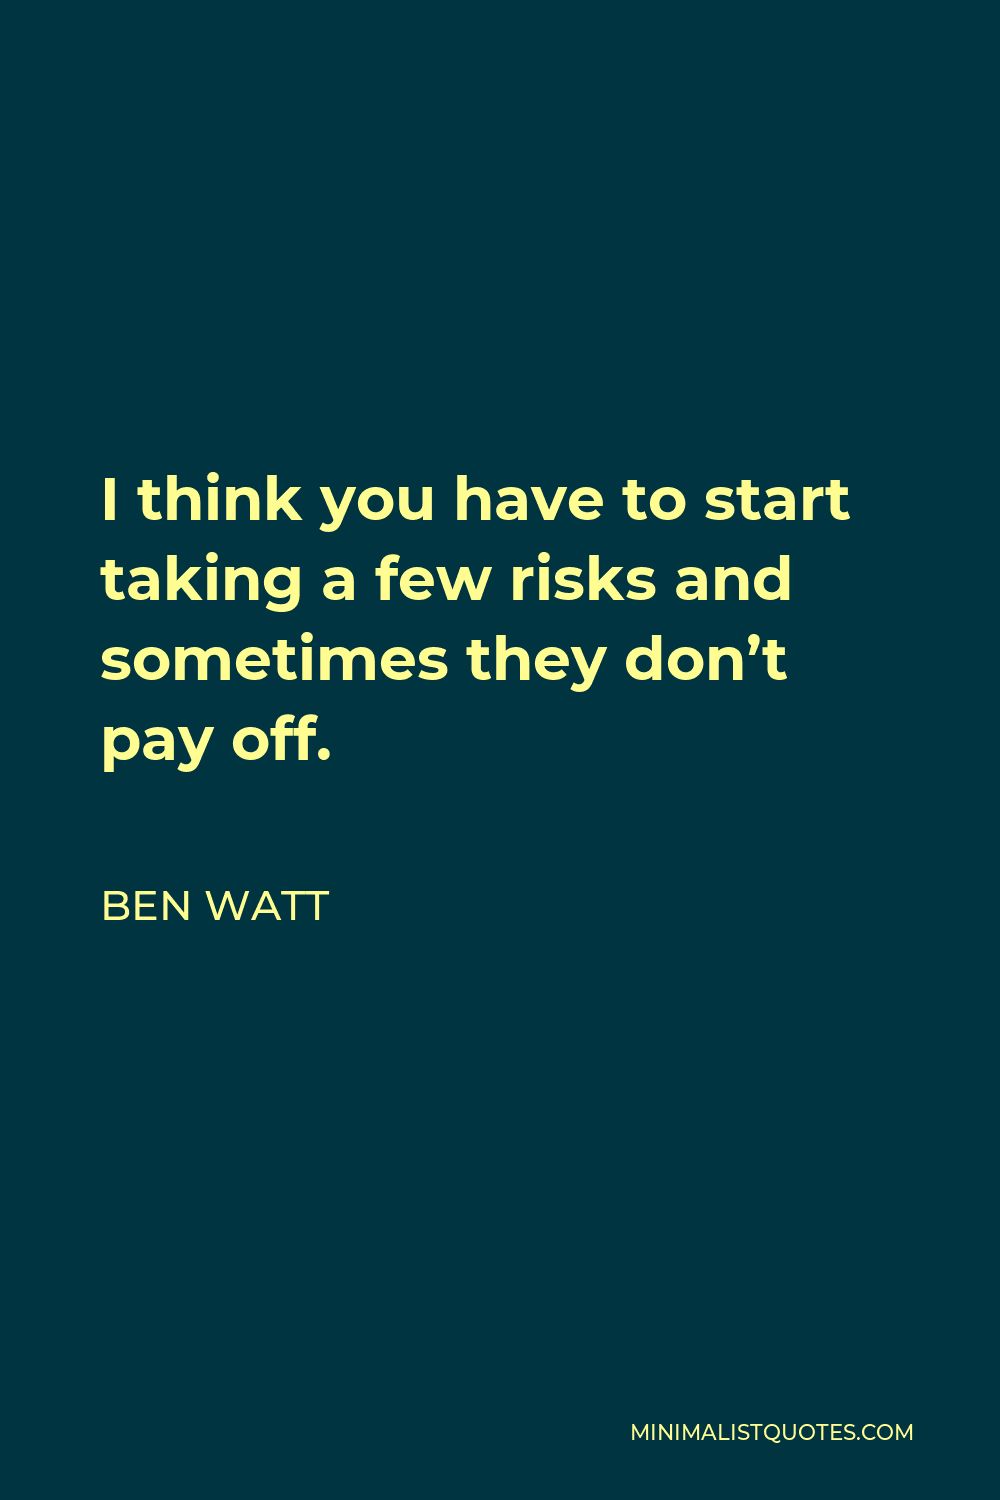 Ben Watt Quote - I think you have to start taking a few risks and sometimes they don’t pay off.